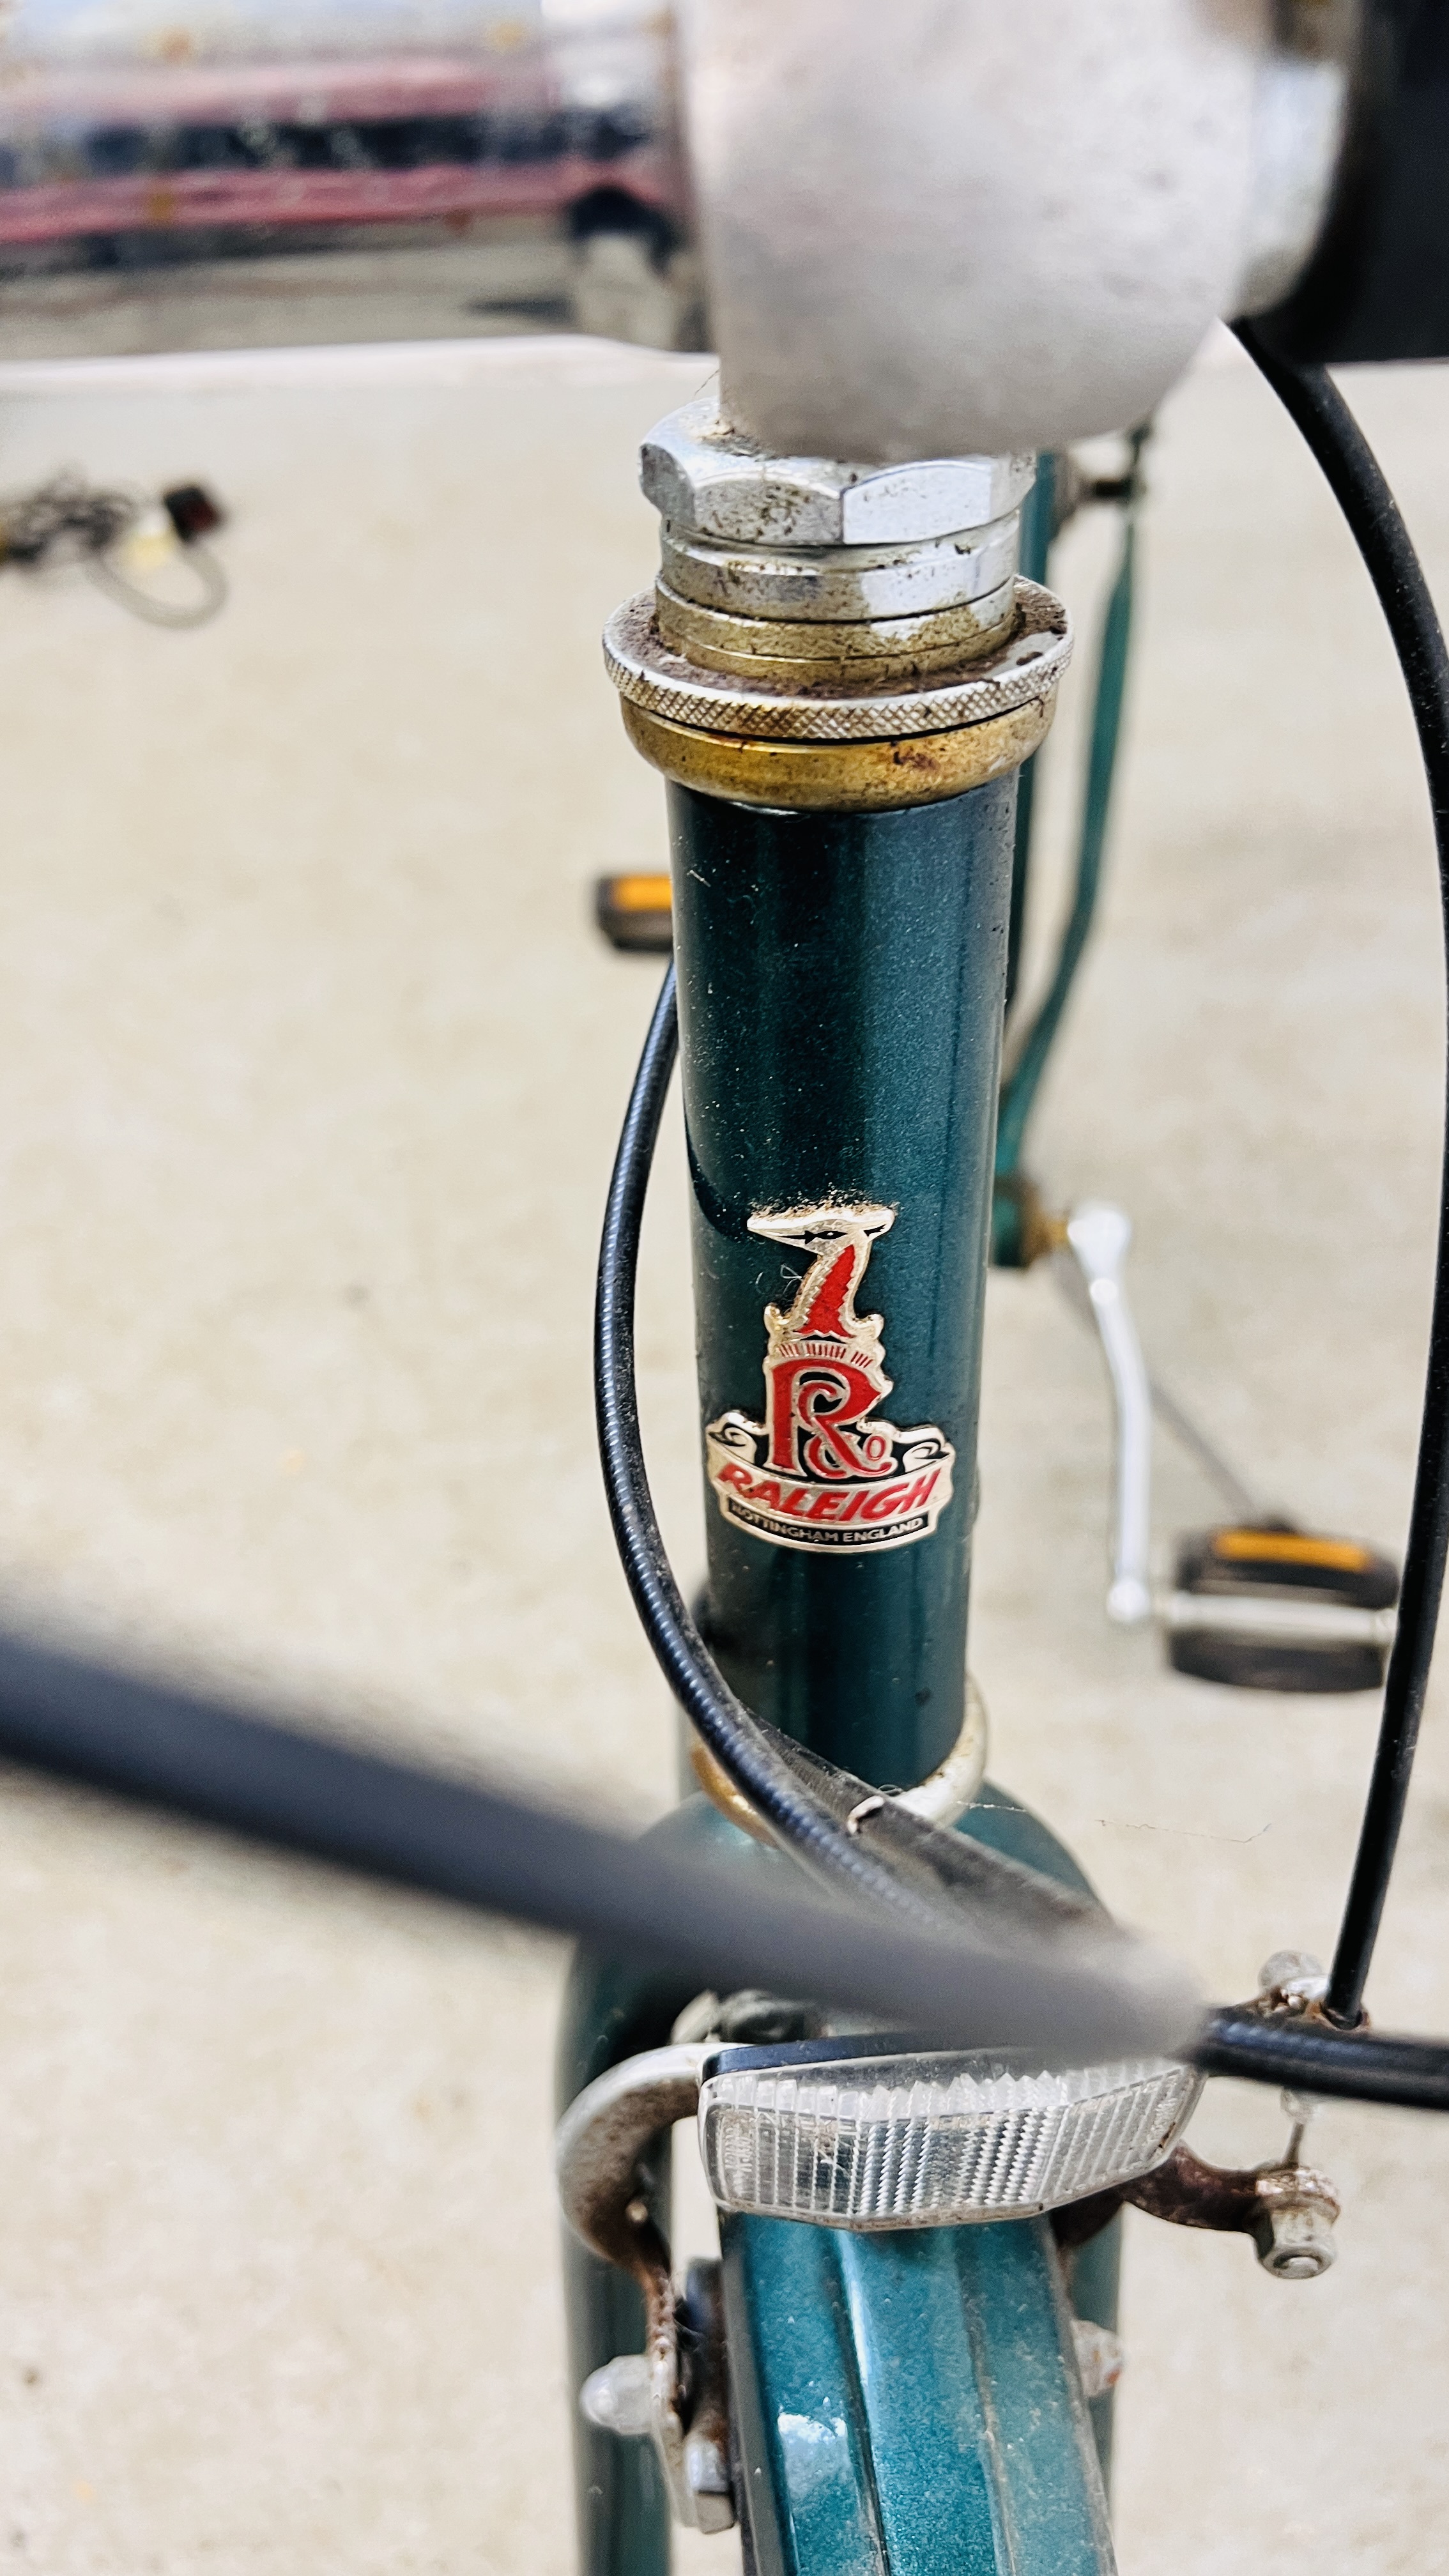 GENTLEMAN'S RALEIGH "CHILTERN" THREE SPEED BICYCLE. - Image 3 of 9